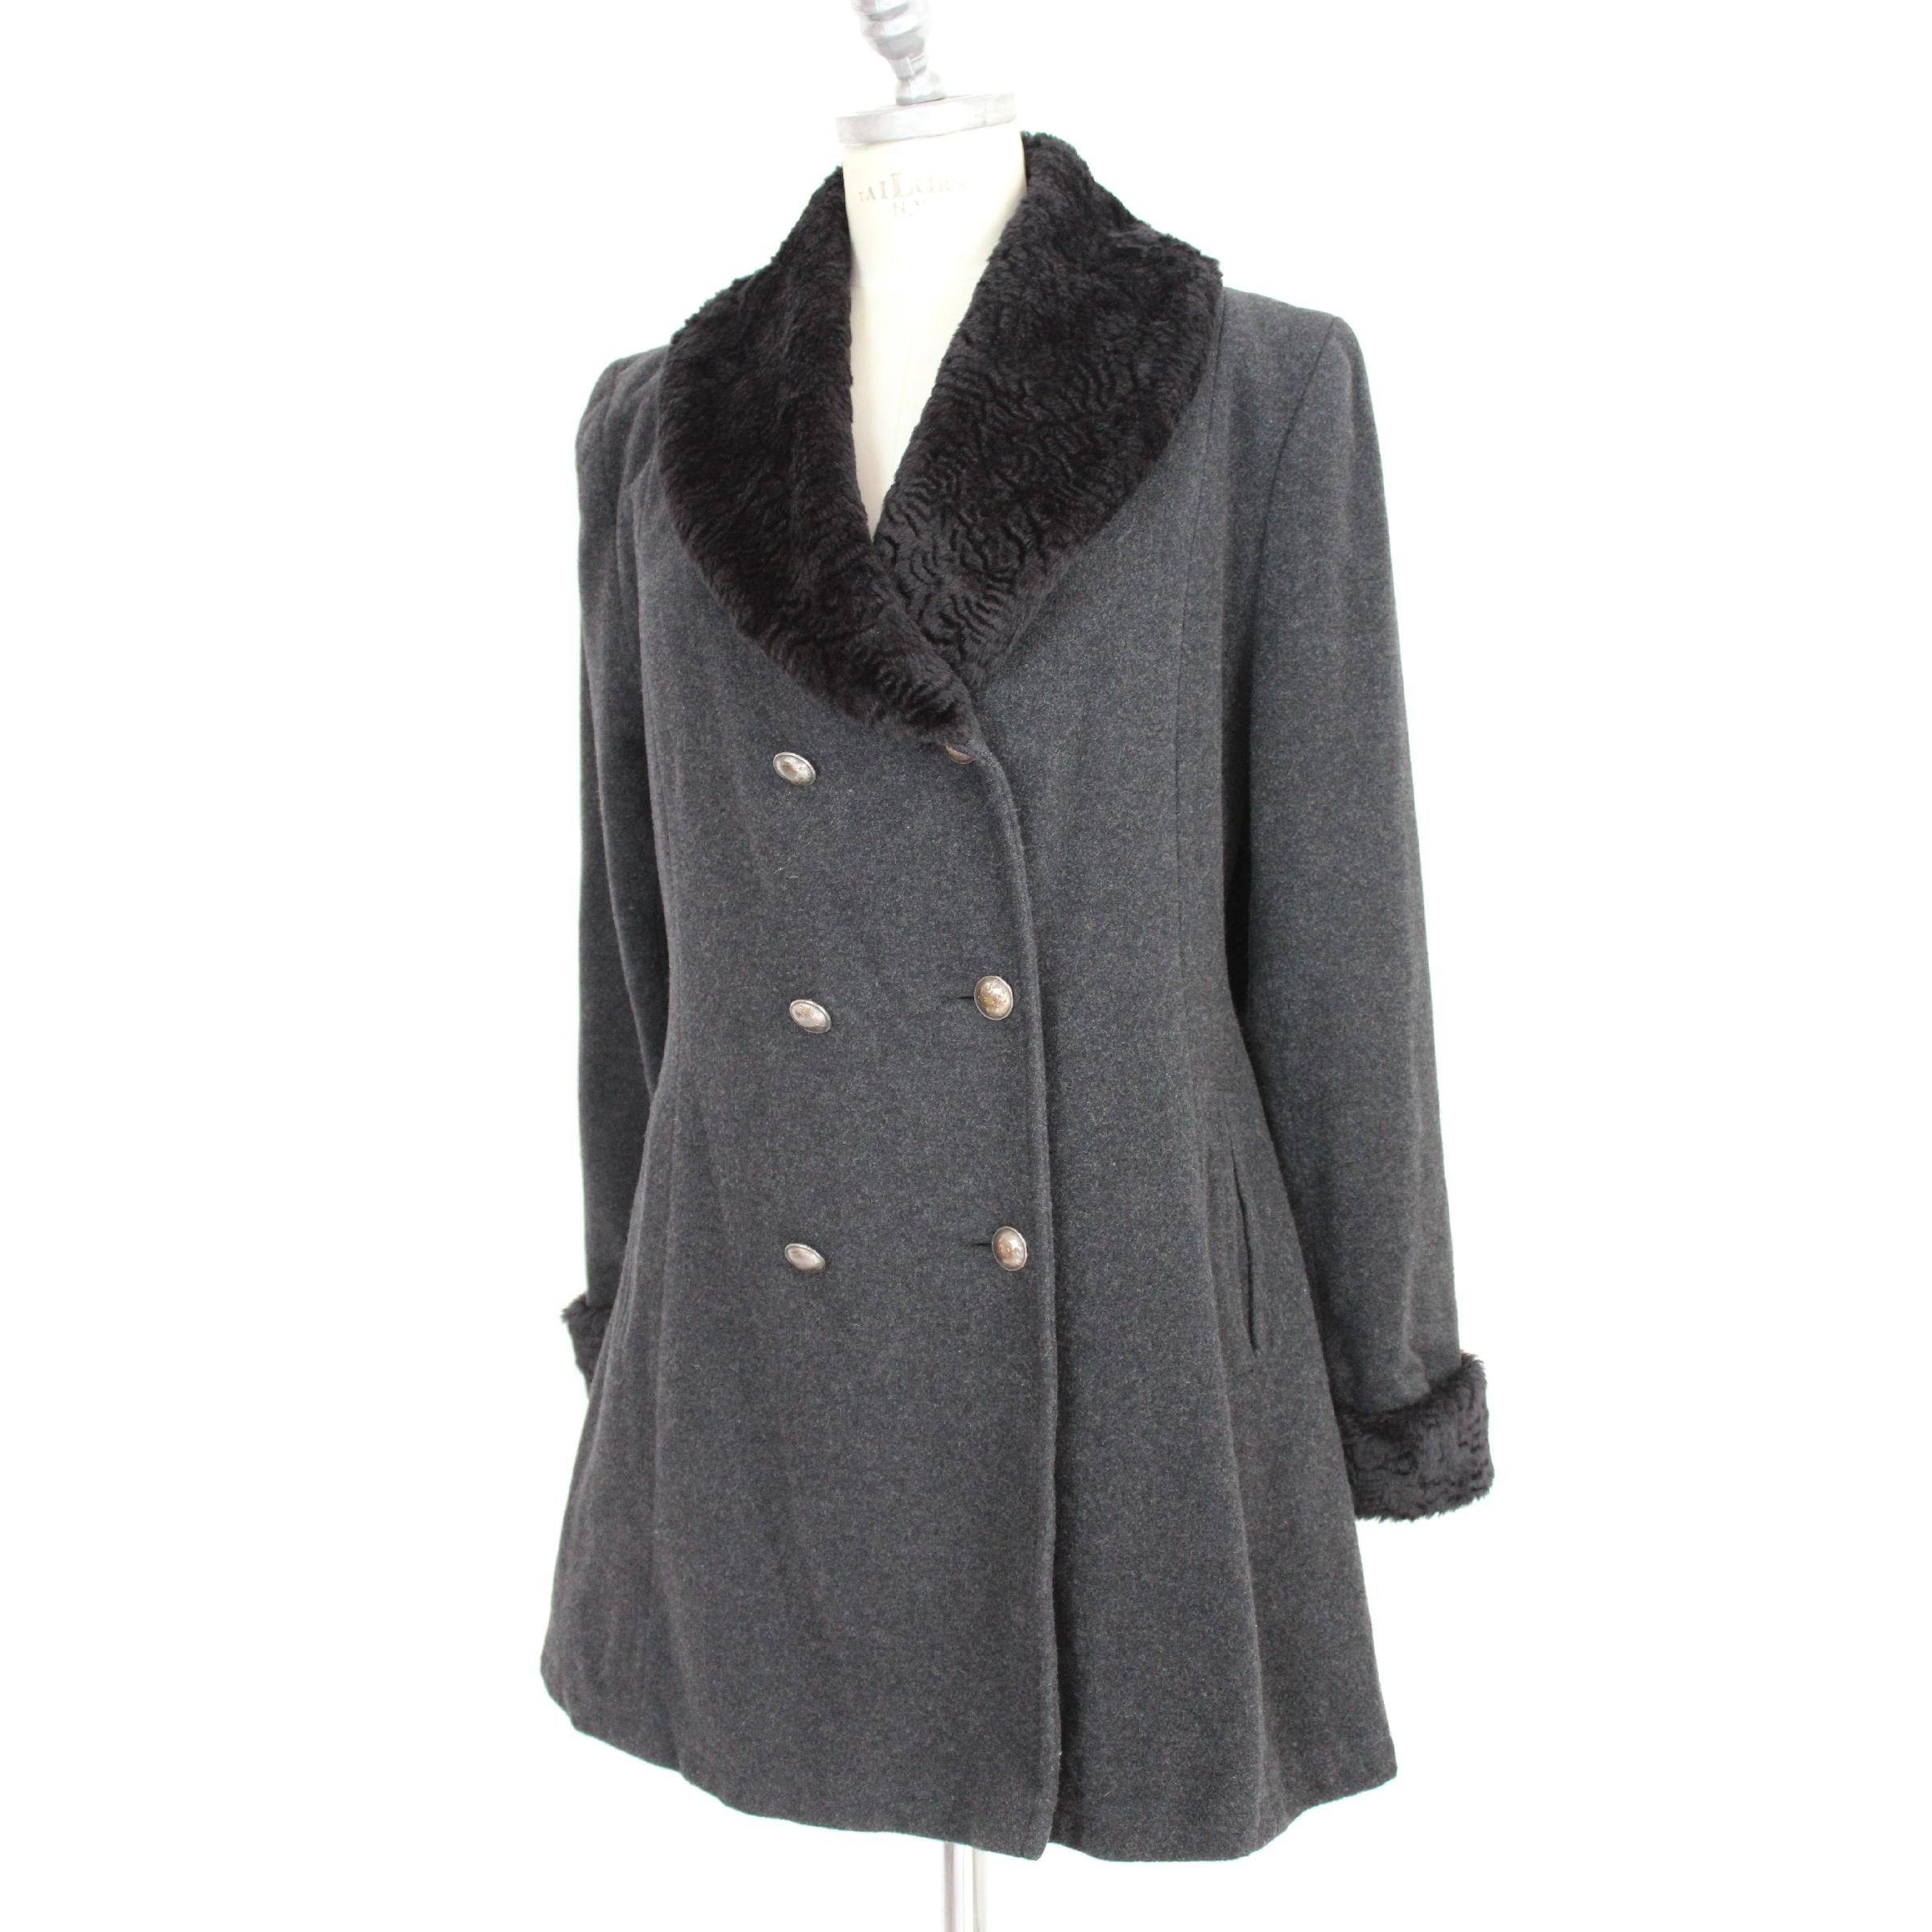 Women's Christian Dior Boutique Gray Anthracite Wool Faux Fur Double Breasted Coat 80s 